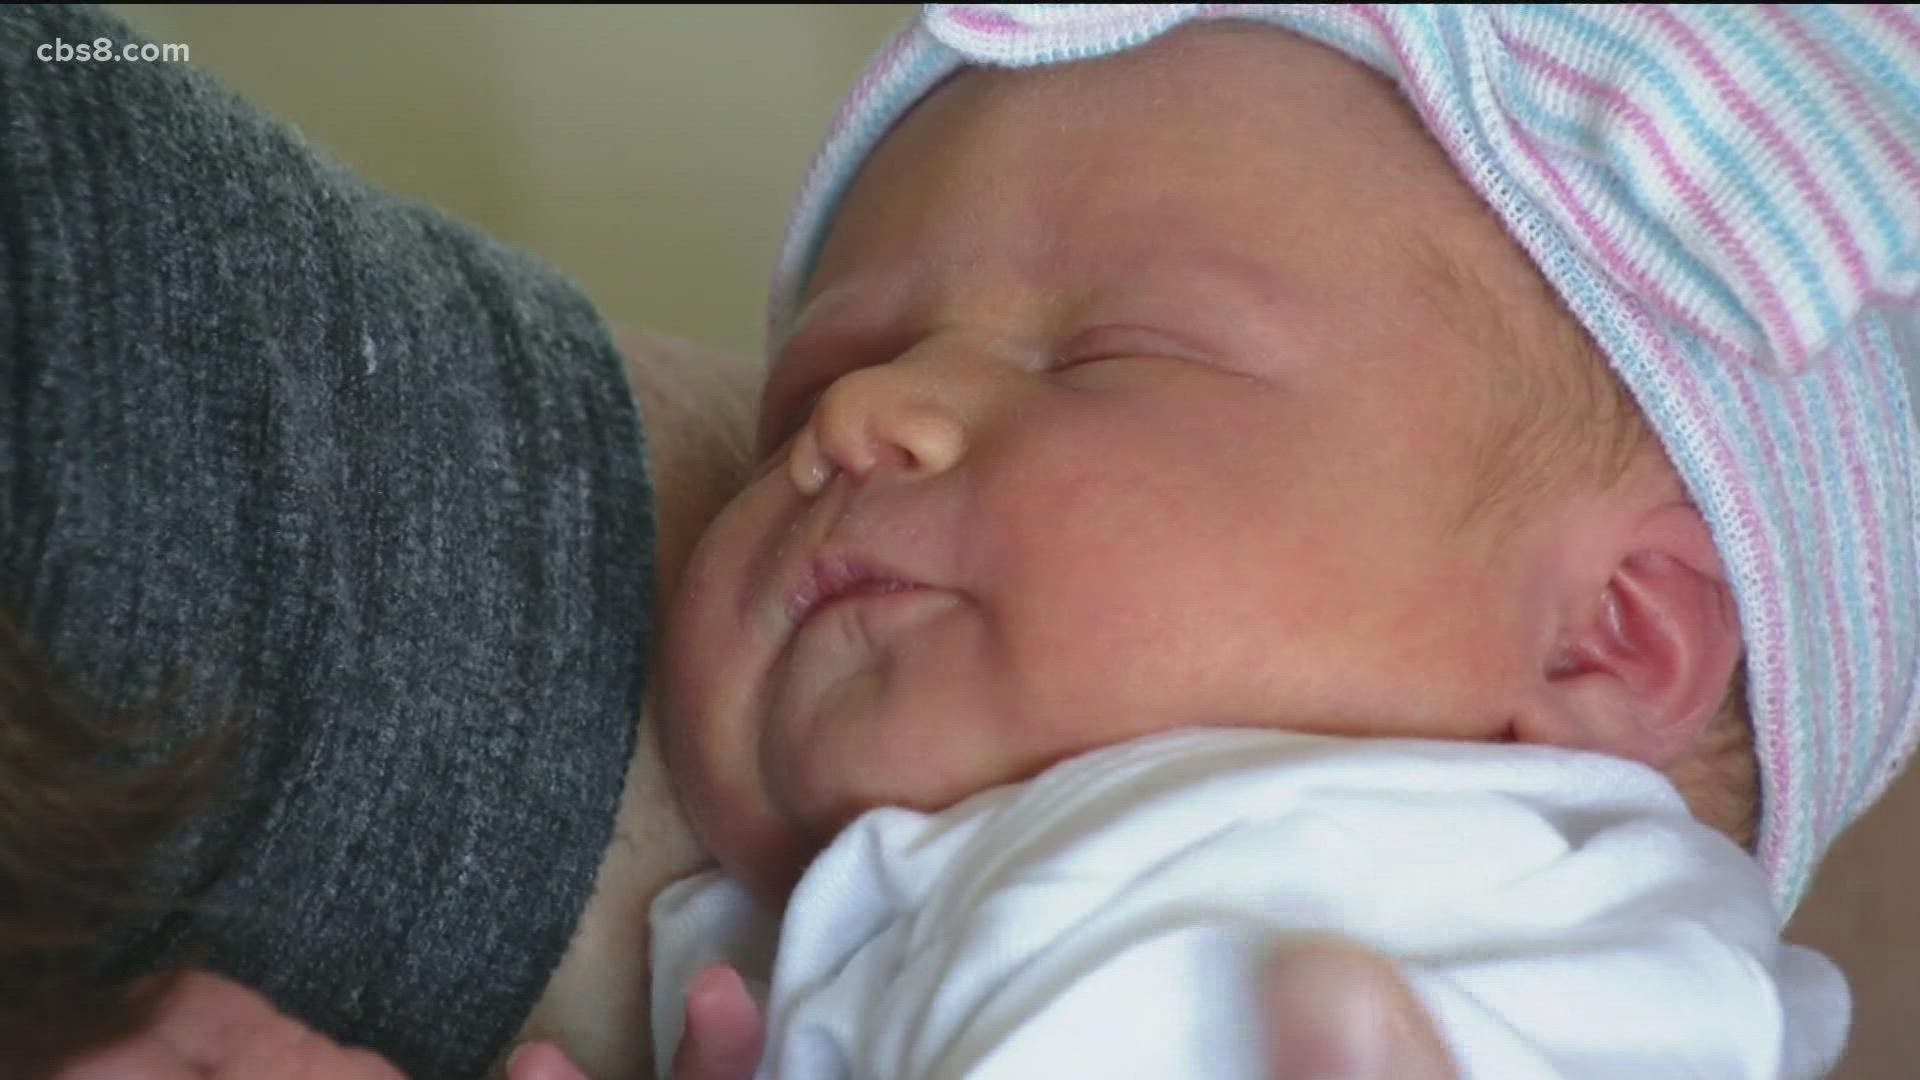 The entire CBS 8 family congratulates Abbie and Chris on their beautiful baby girl, Bexley Virginia Black.